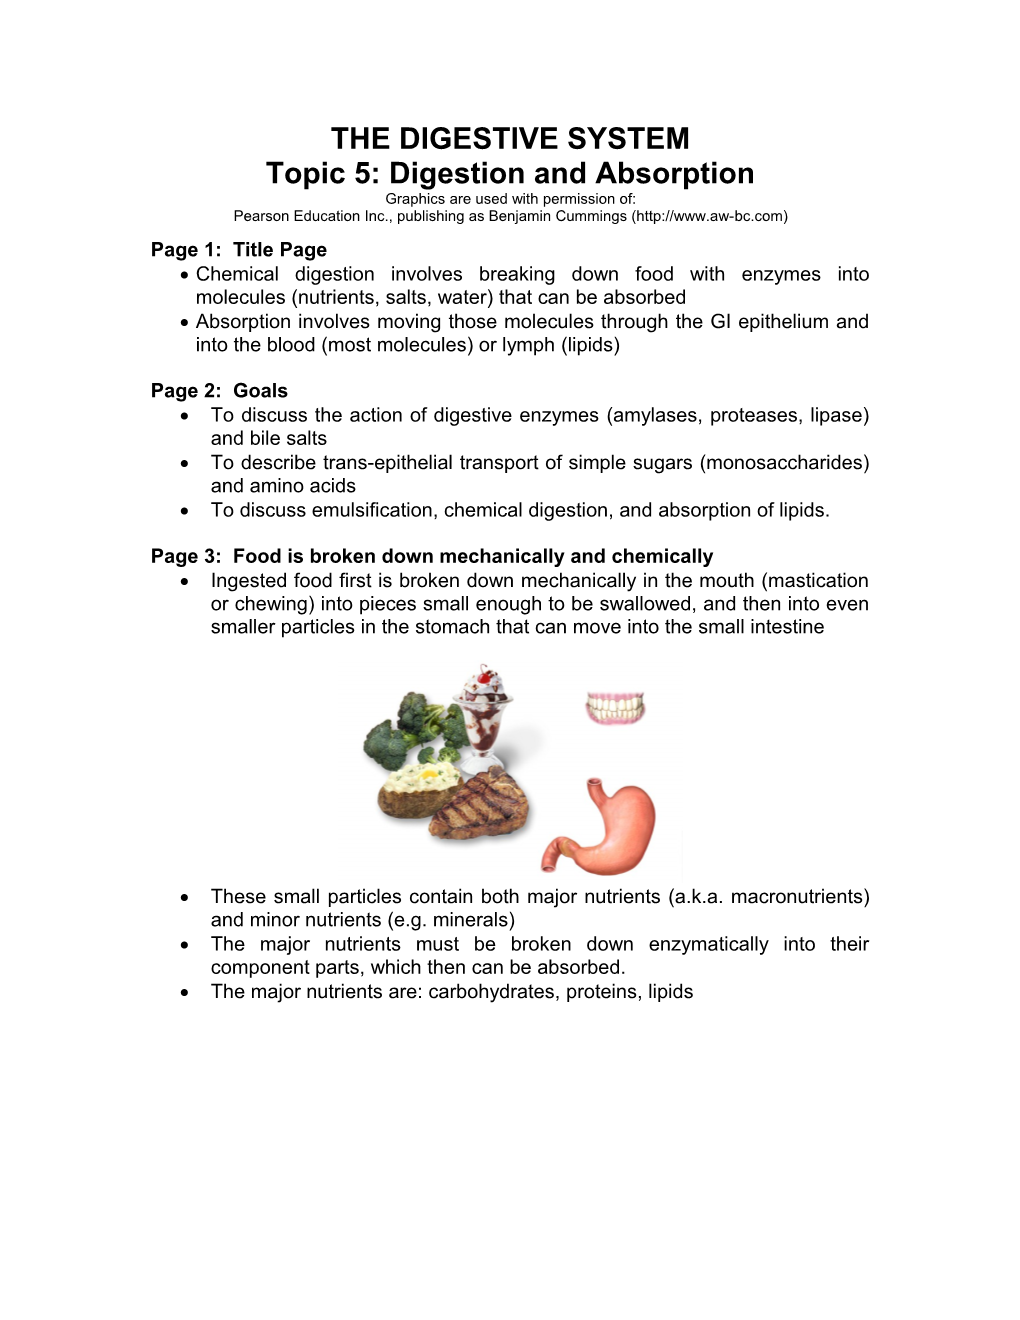 Anatomy Review: Digestive System s3